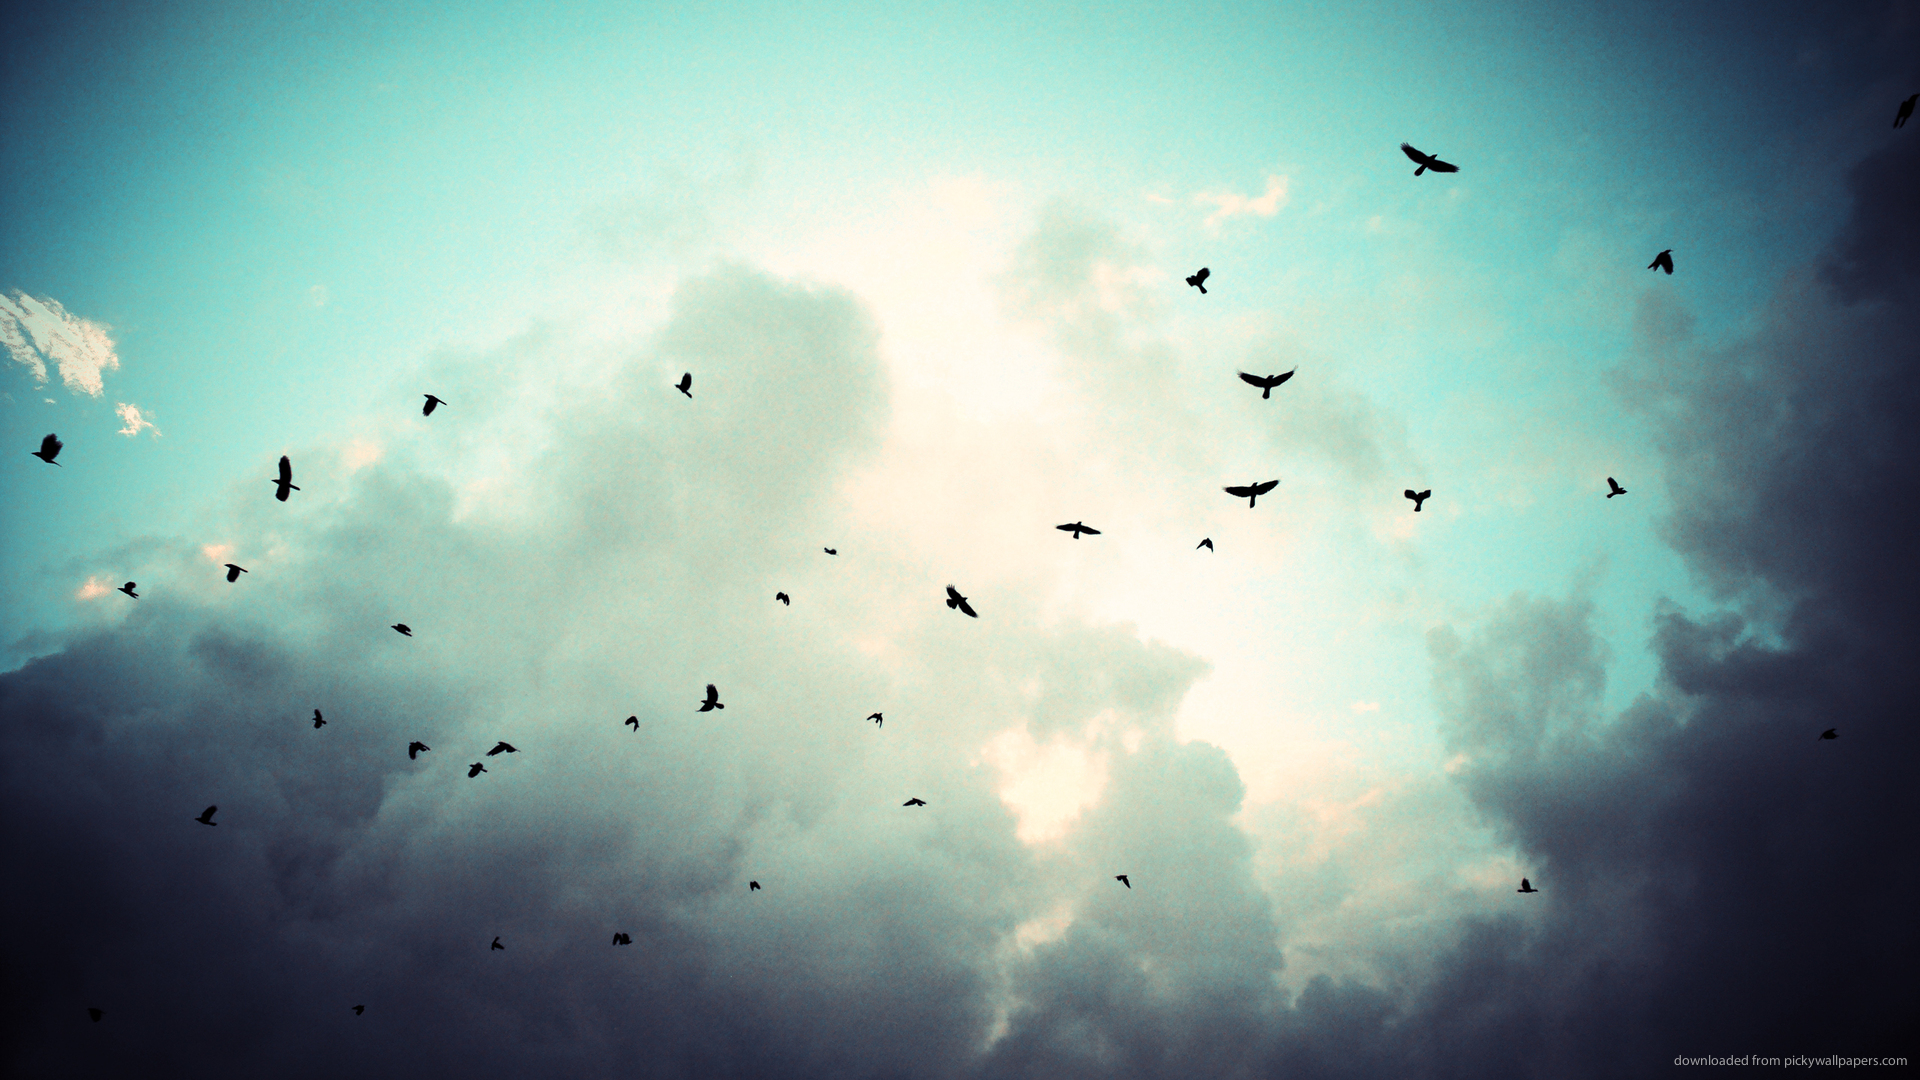 Download 1920x1080 Birds Silhouettes On A Cyan Sky Wallpaper